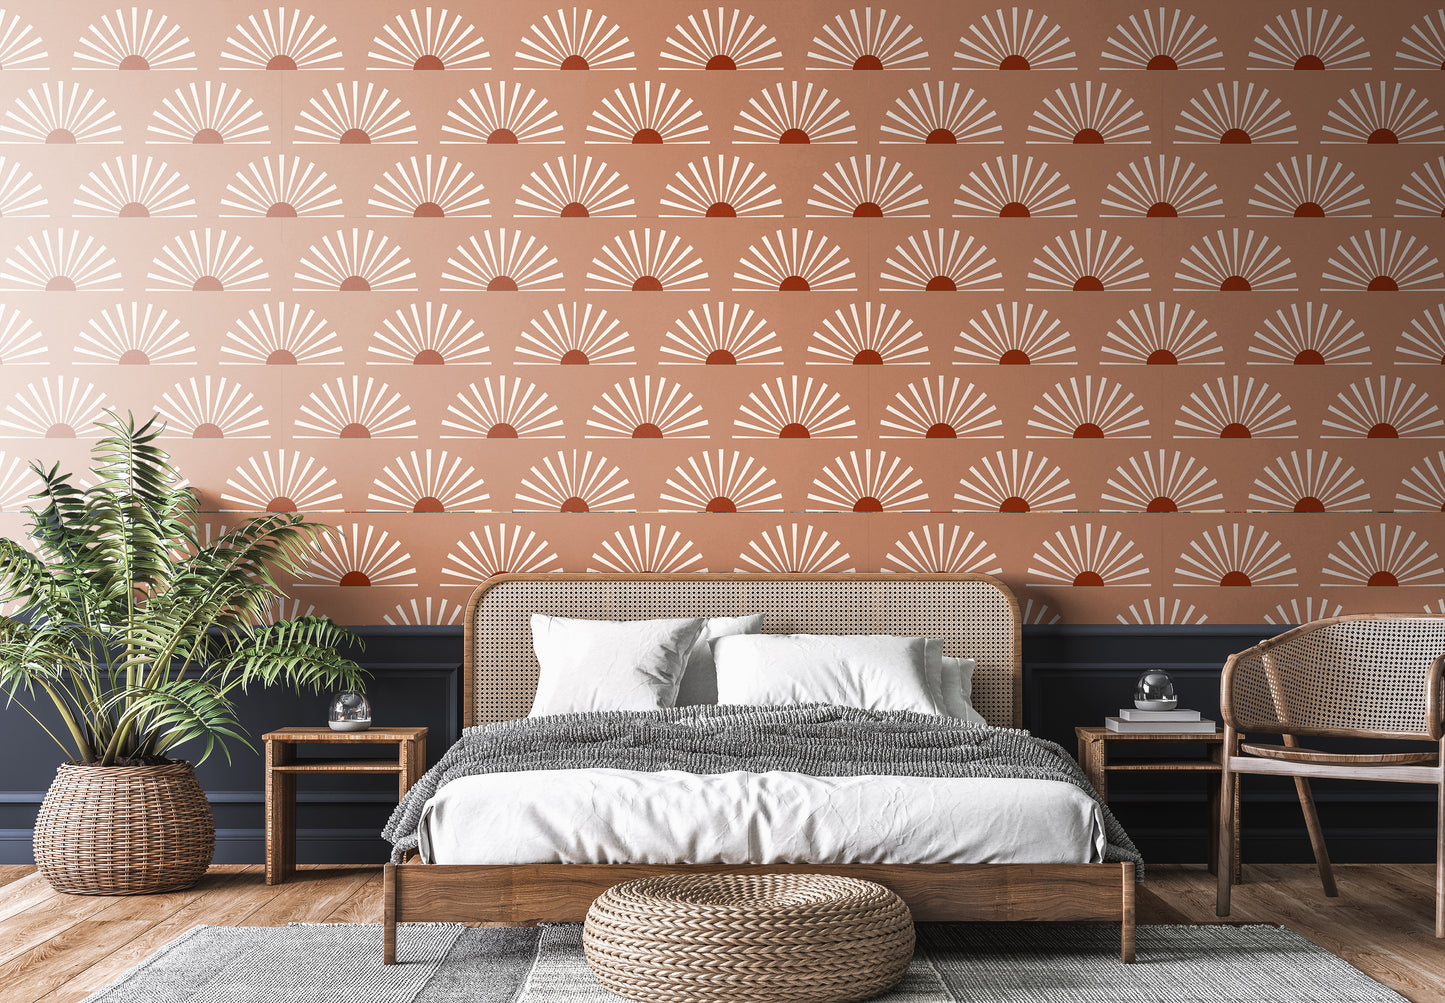 Boho Sunset Removable Peel And Stick Wallpaper